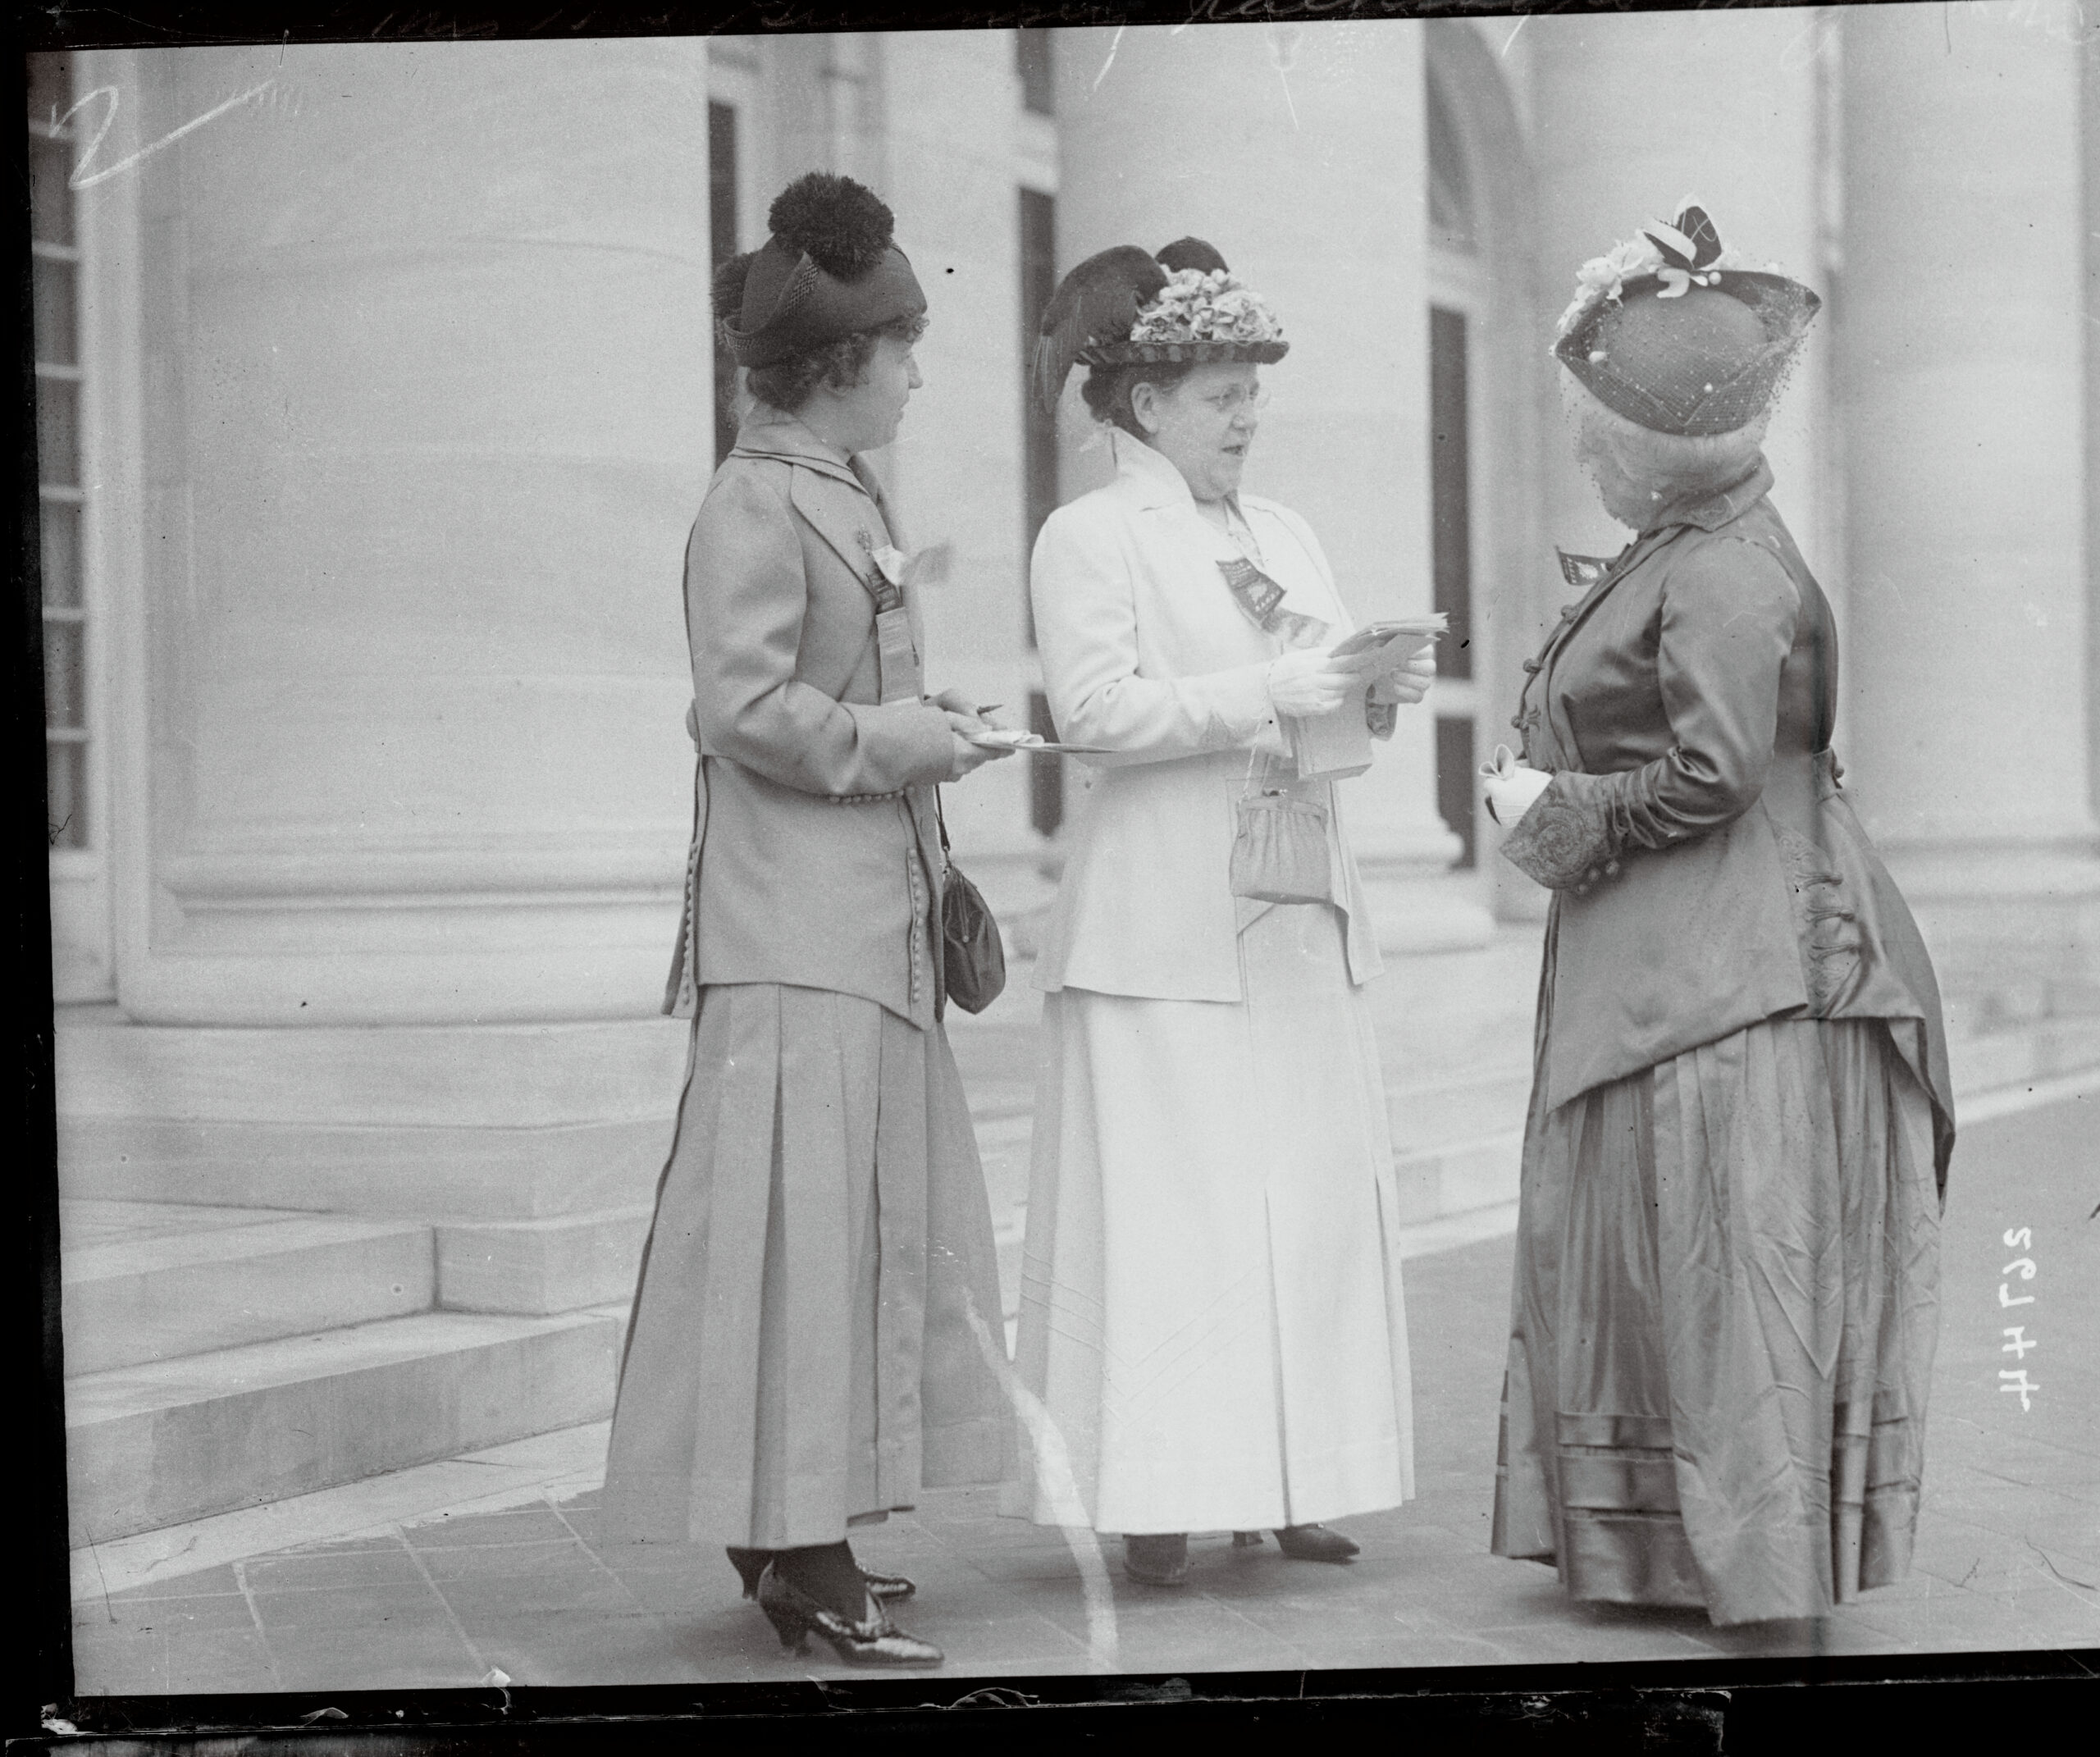 (Original Caption) Washington, DC: Daughters Of The American Revolution Hold Their Annual Election At Washington, D. C. Mrs. George Thatcher Guernsey talking to Mrs. John Miller Horton of New York, one of her strongest supporters with Mrs. R. R. Bittman, secretary of Mrs. Guernsey.